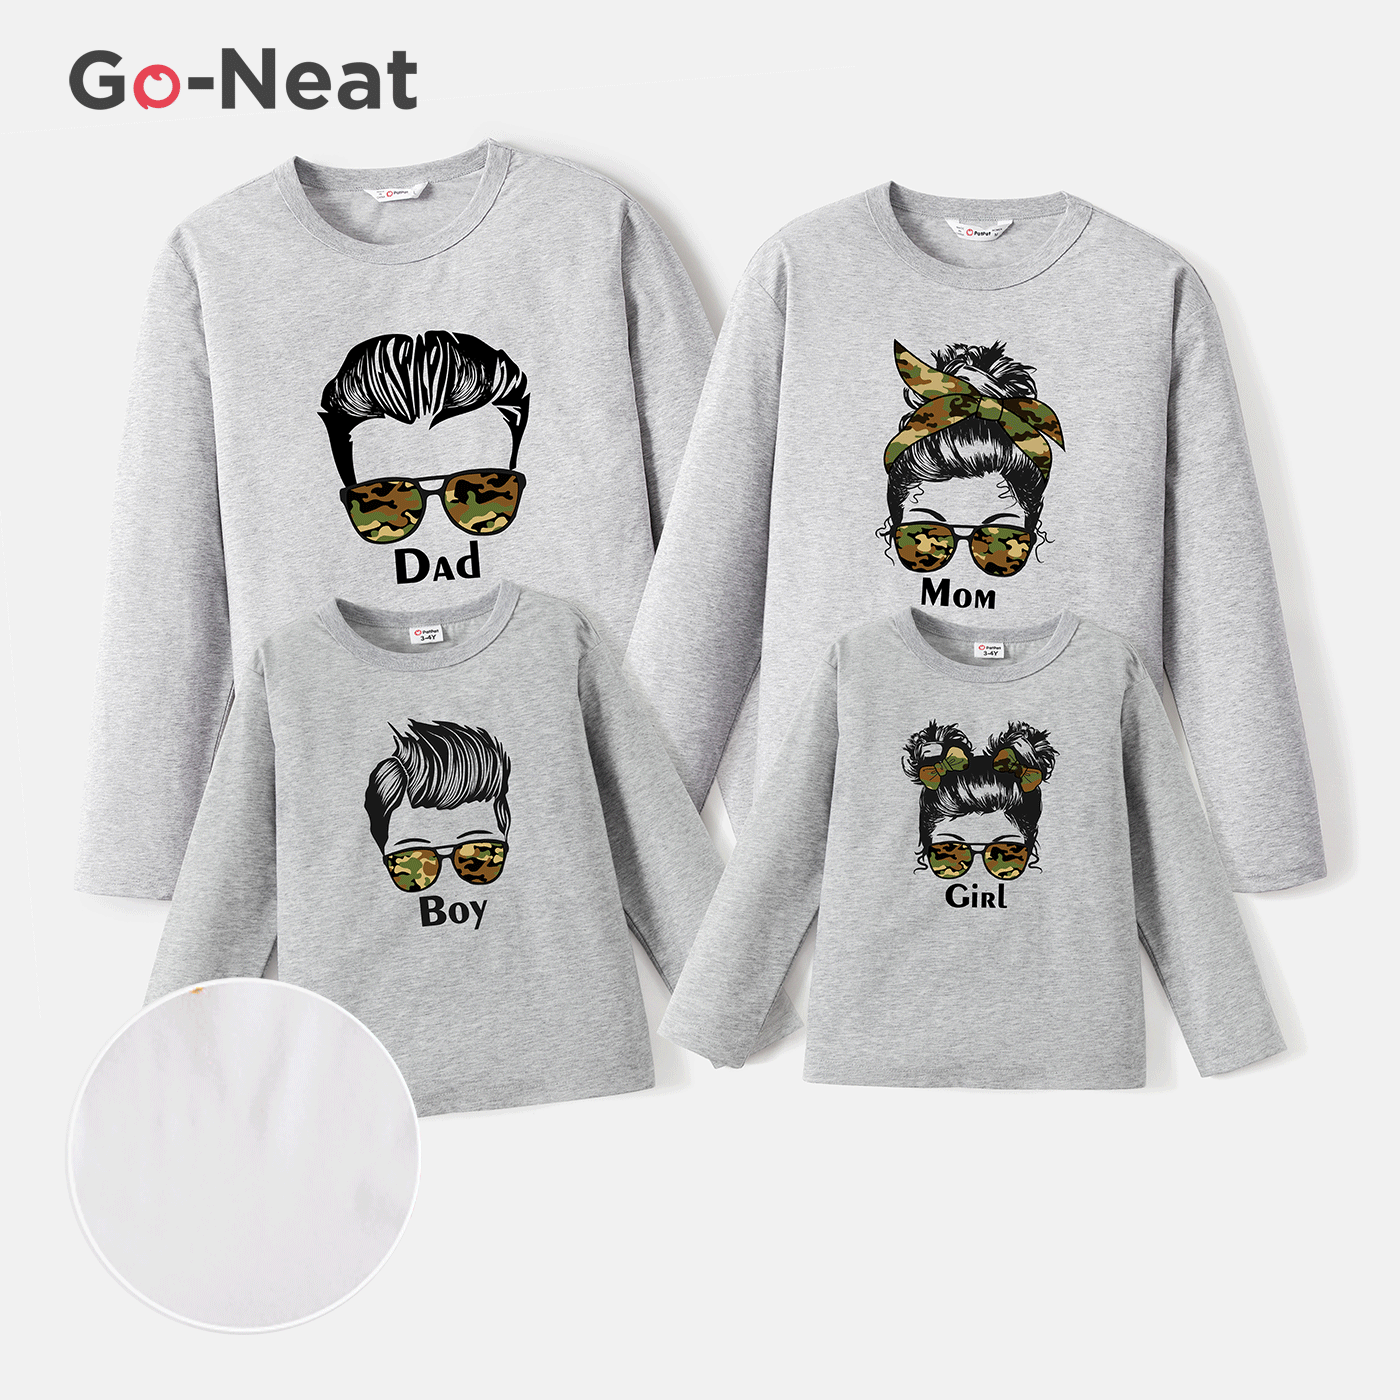 Go-Neat Water Repellent and Stain Resistant Family Matching Figure Print Long-sleeve Tee